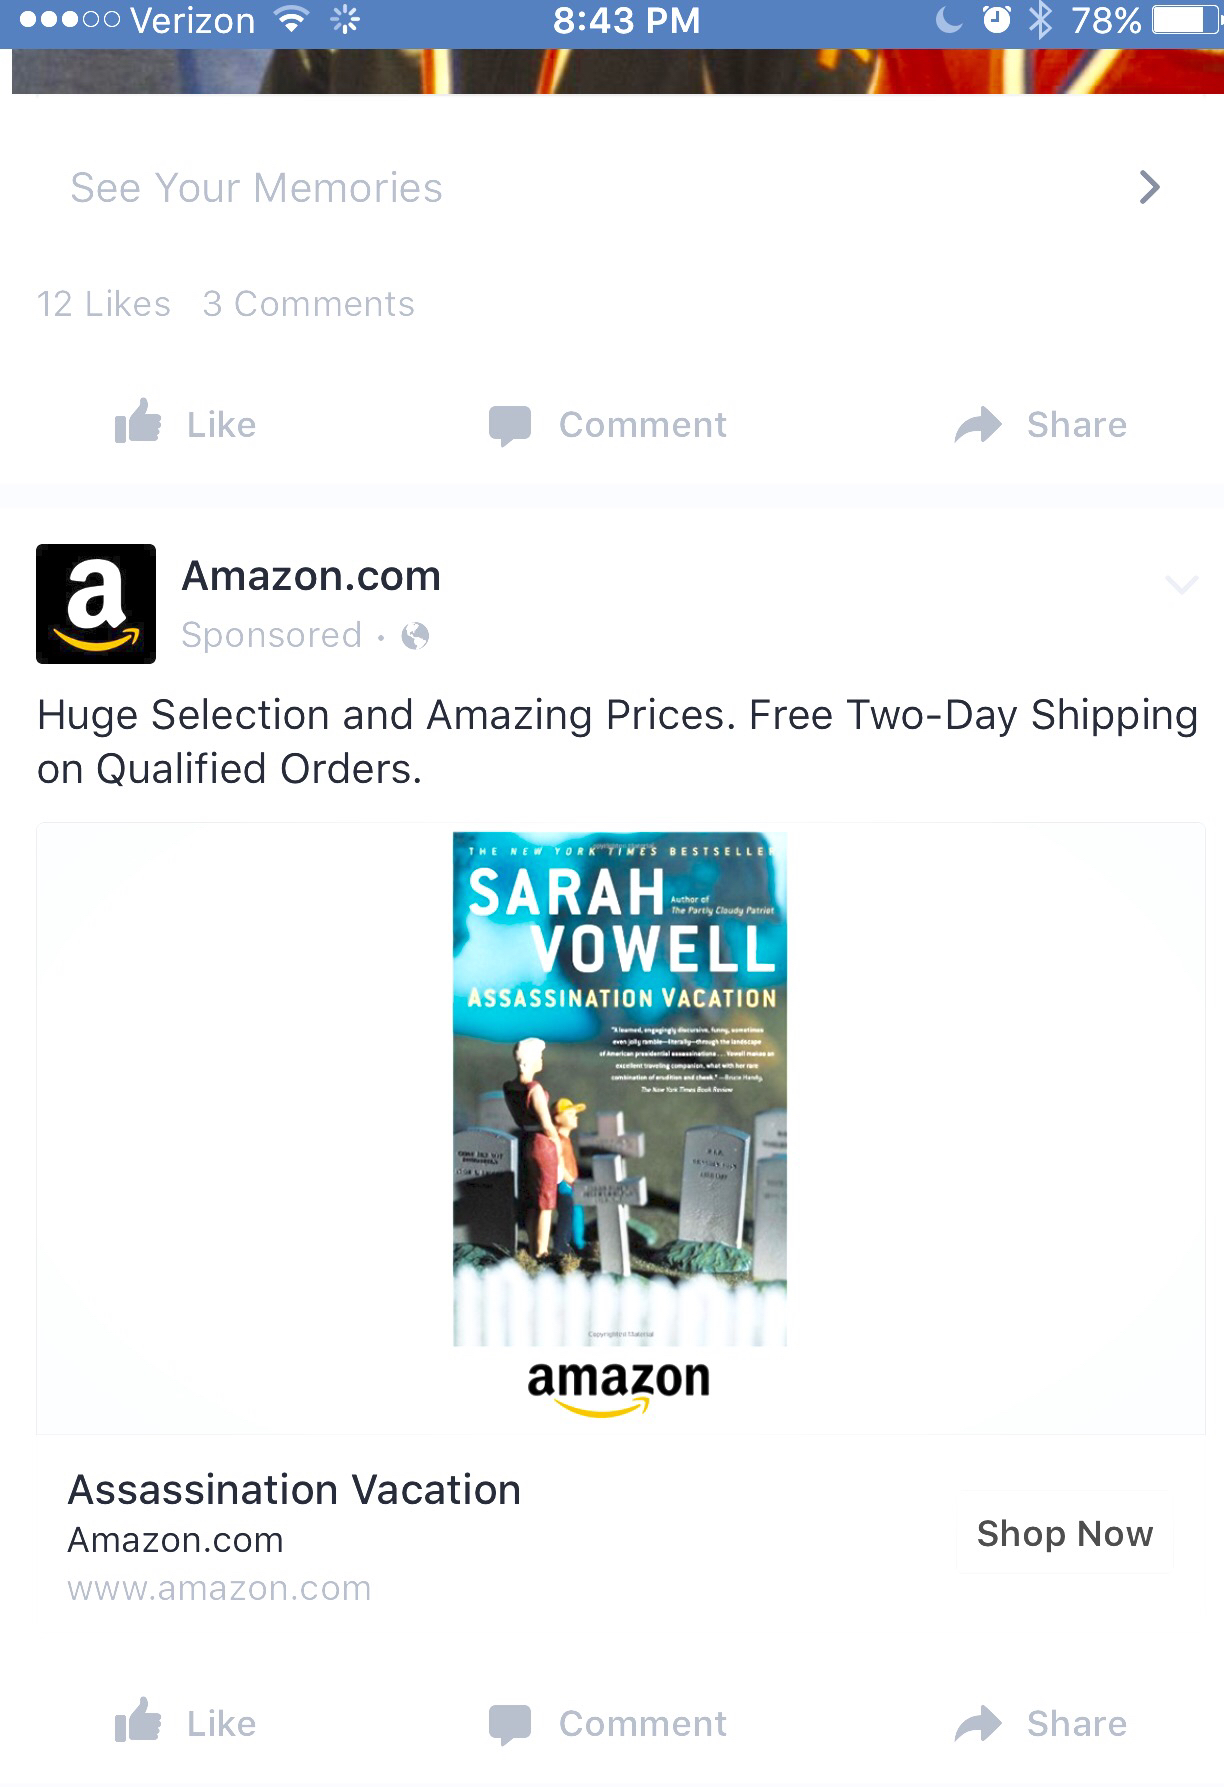 Why are Amazon and Facebook Stalking Me?